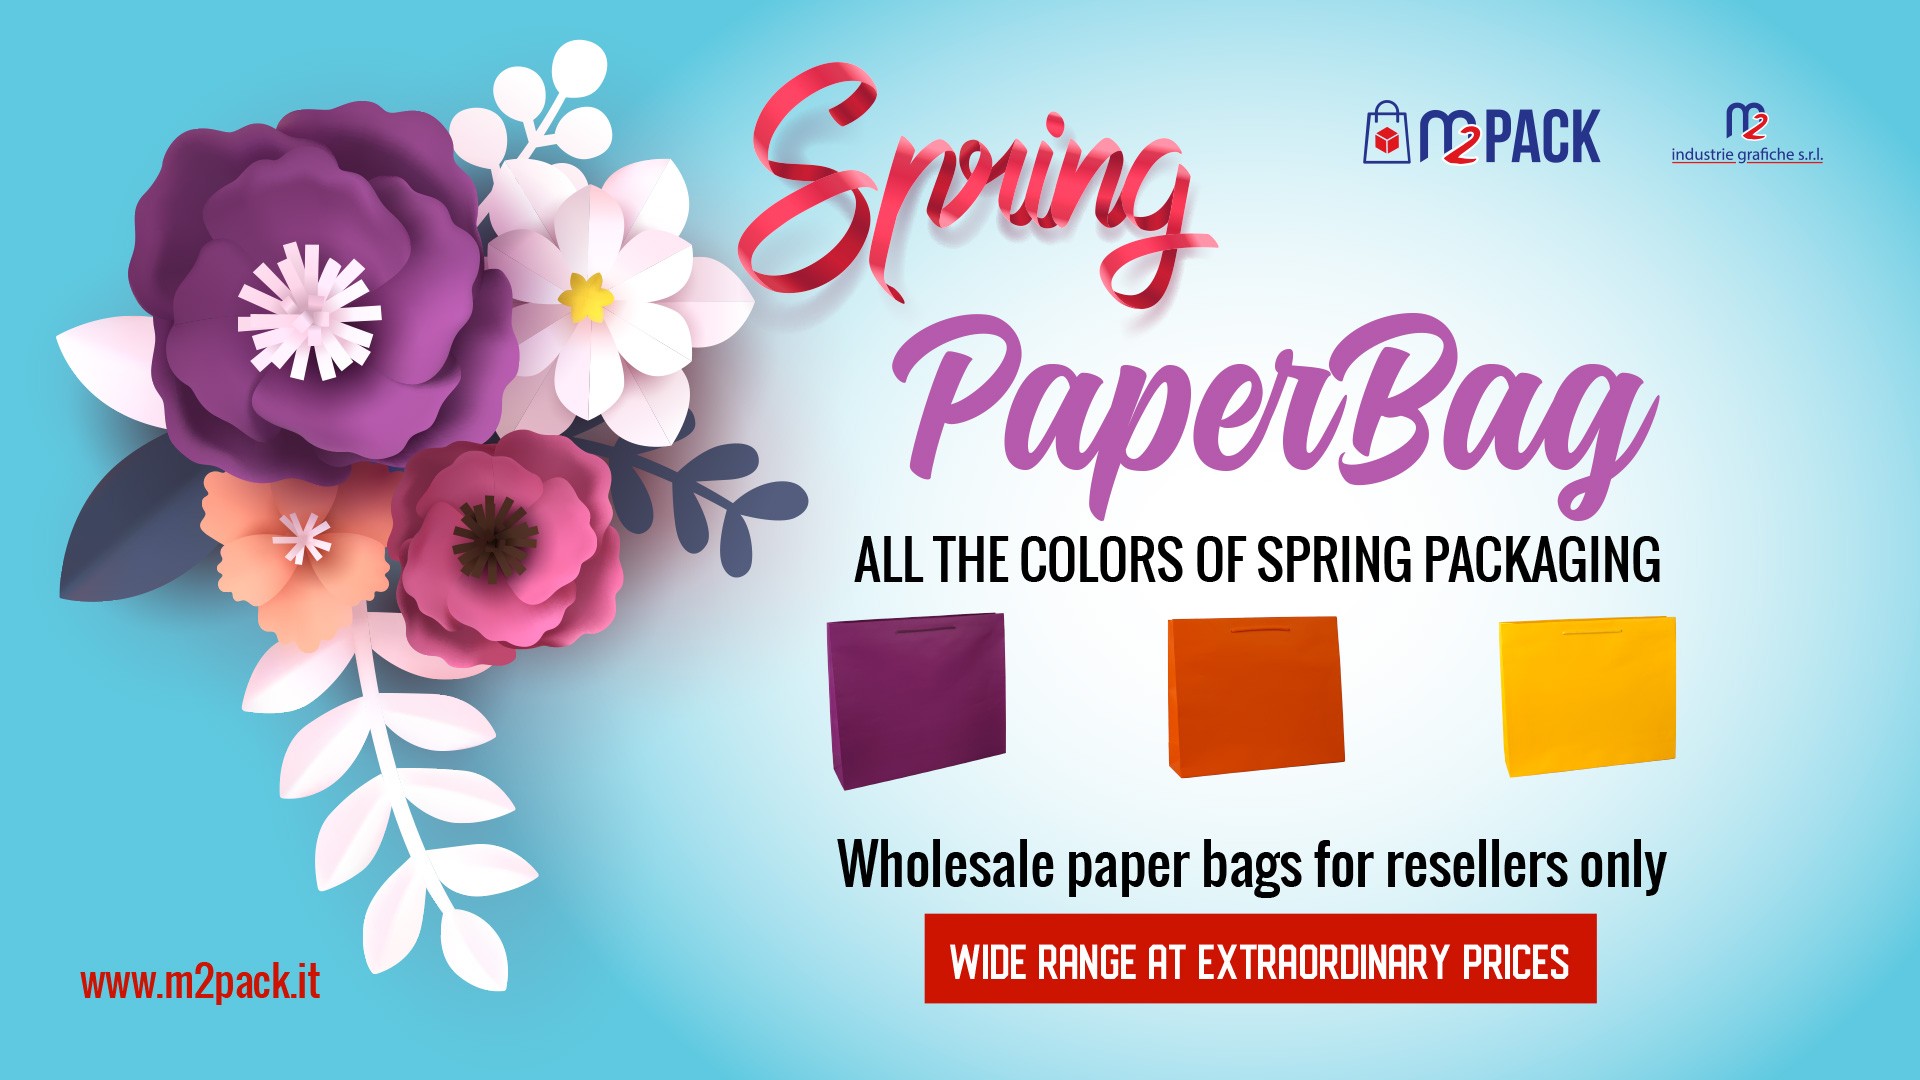 SPRING SHOPPER. ALL THE COLORS OF SPRING PACKAGING